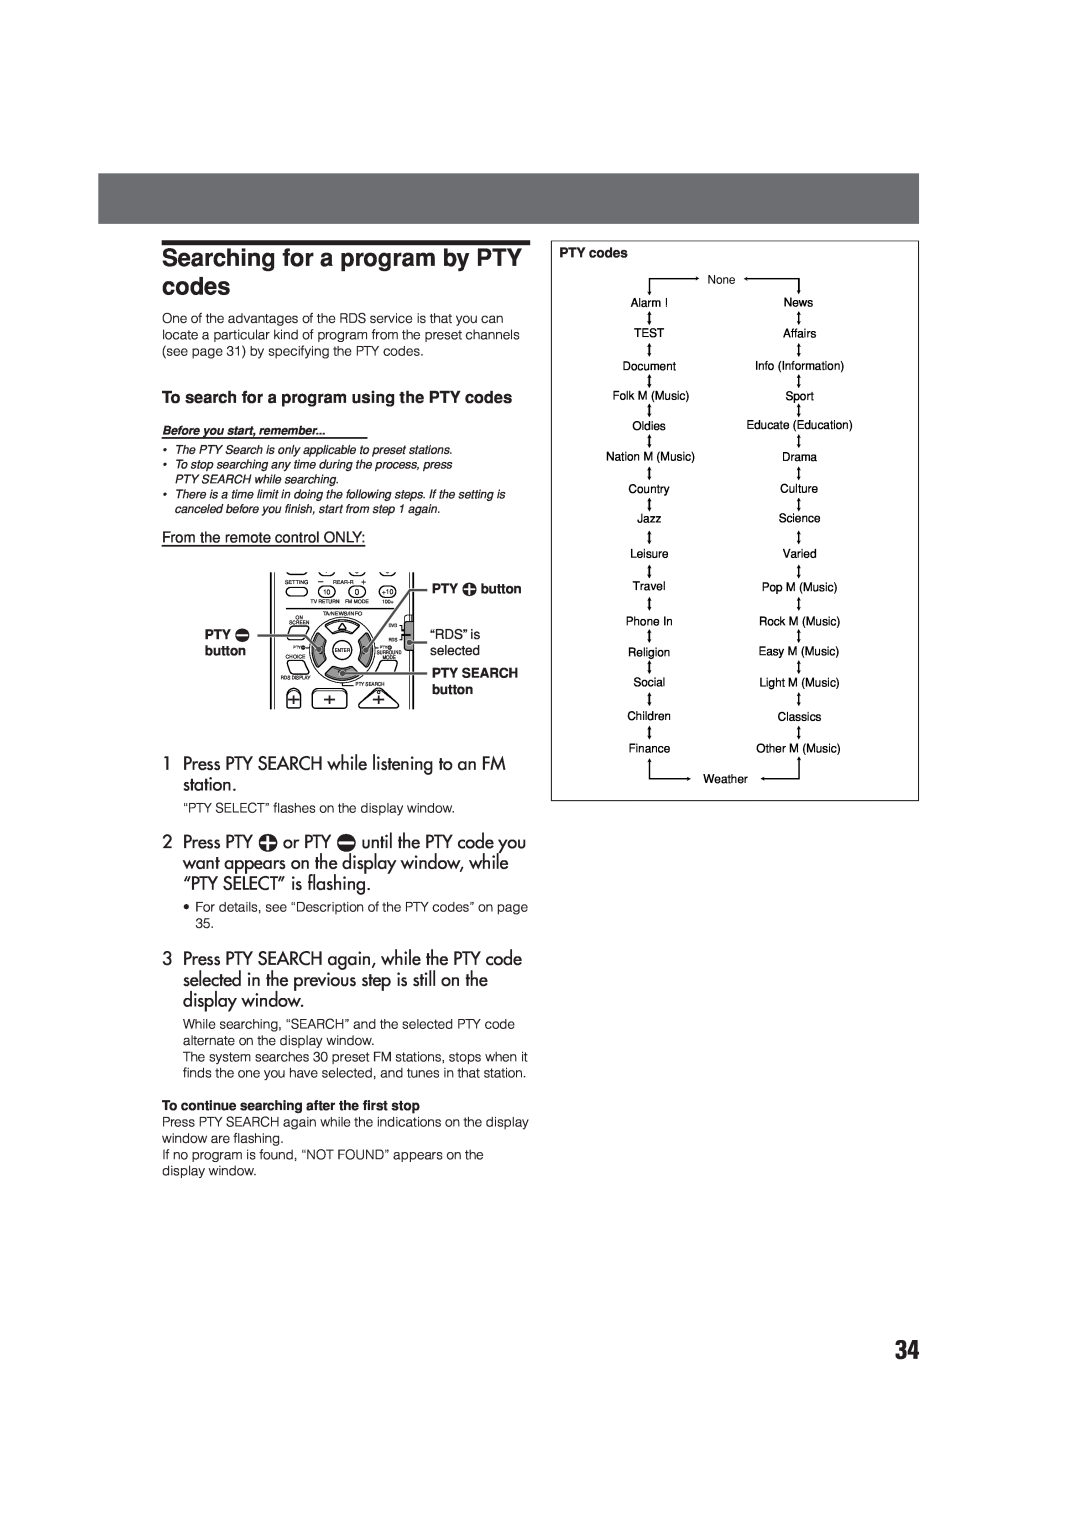 JVC XV-THV70R, LVT0865-004A, SP-XCV70 Searching for a program by PTY codes, To search for a program using the PTY codes 